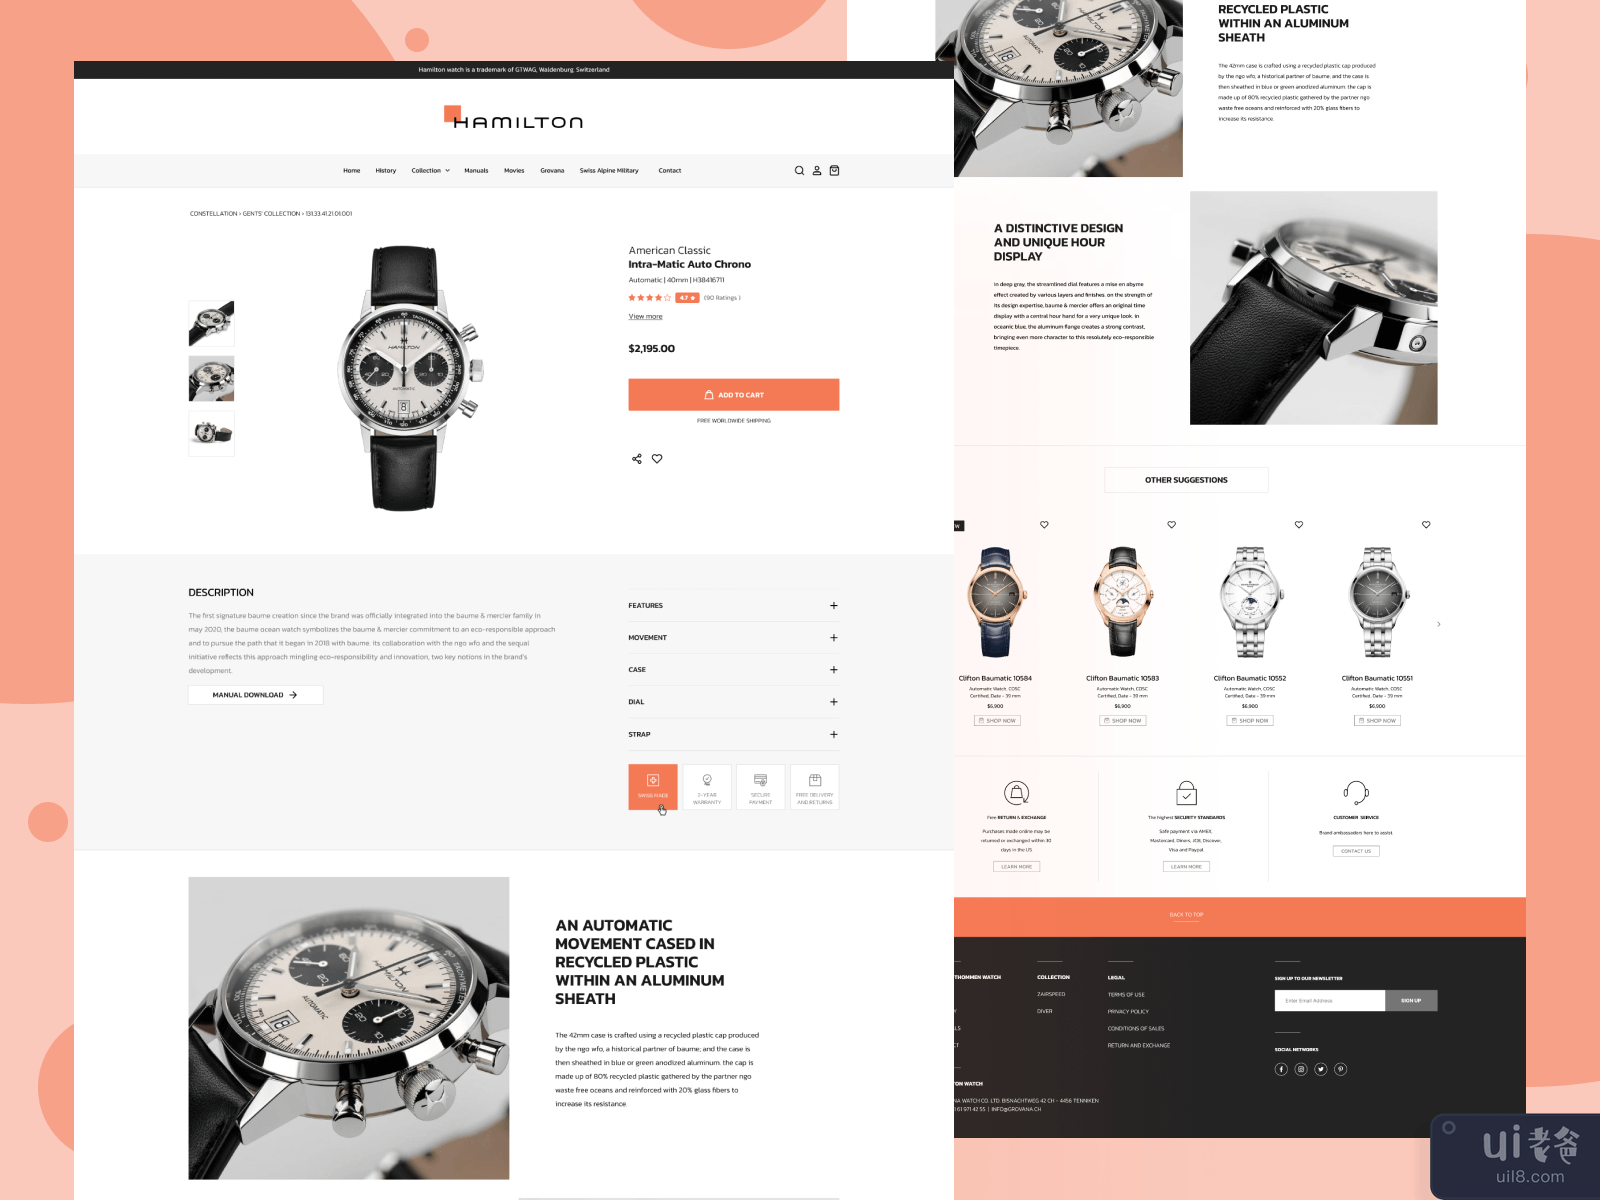 Watch product detail page 